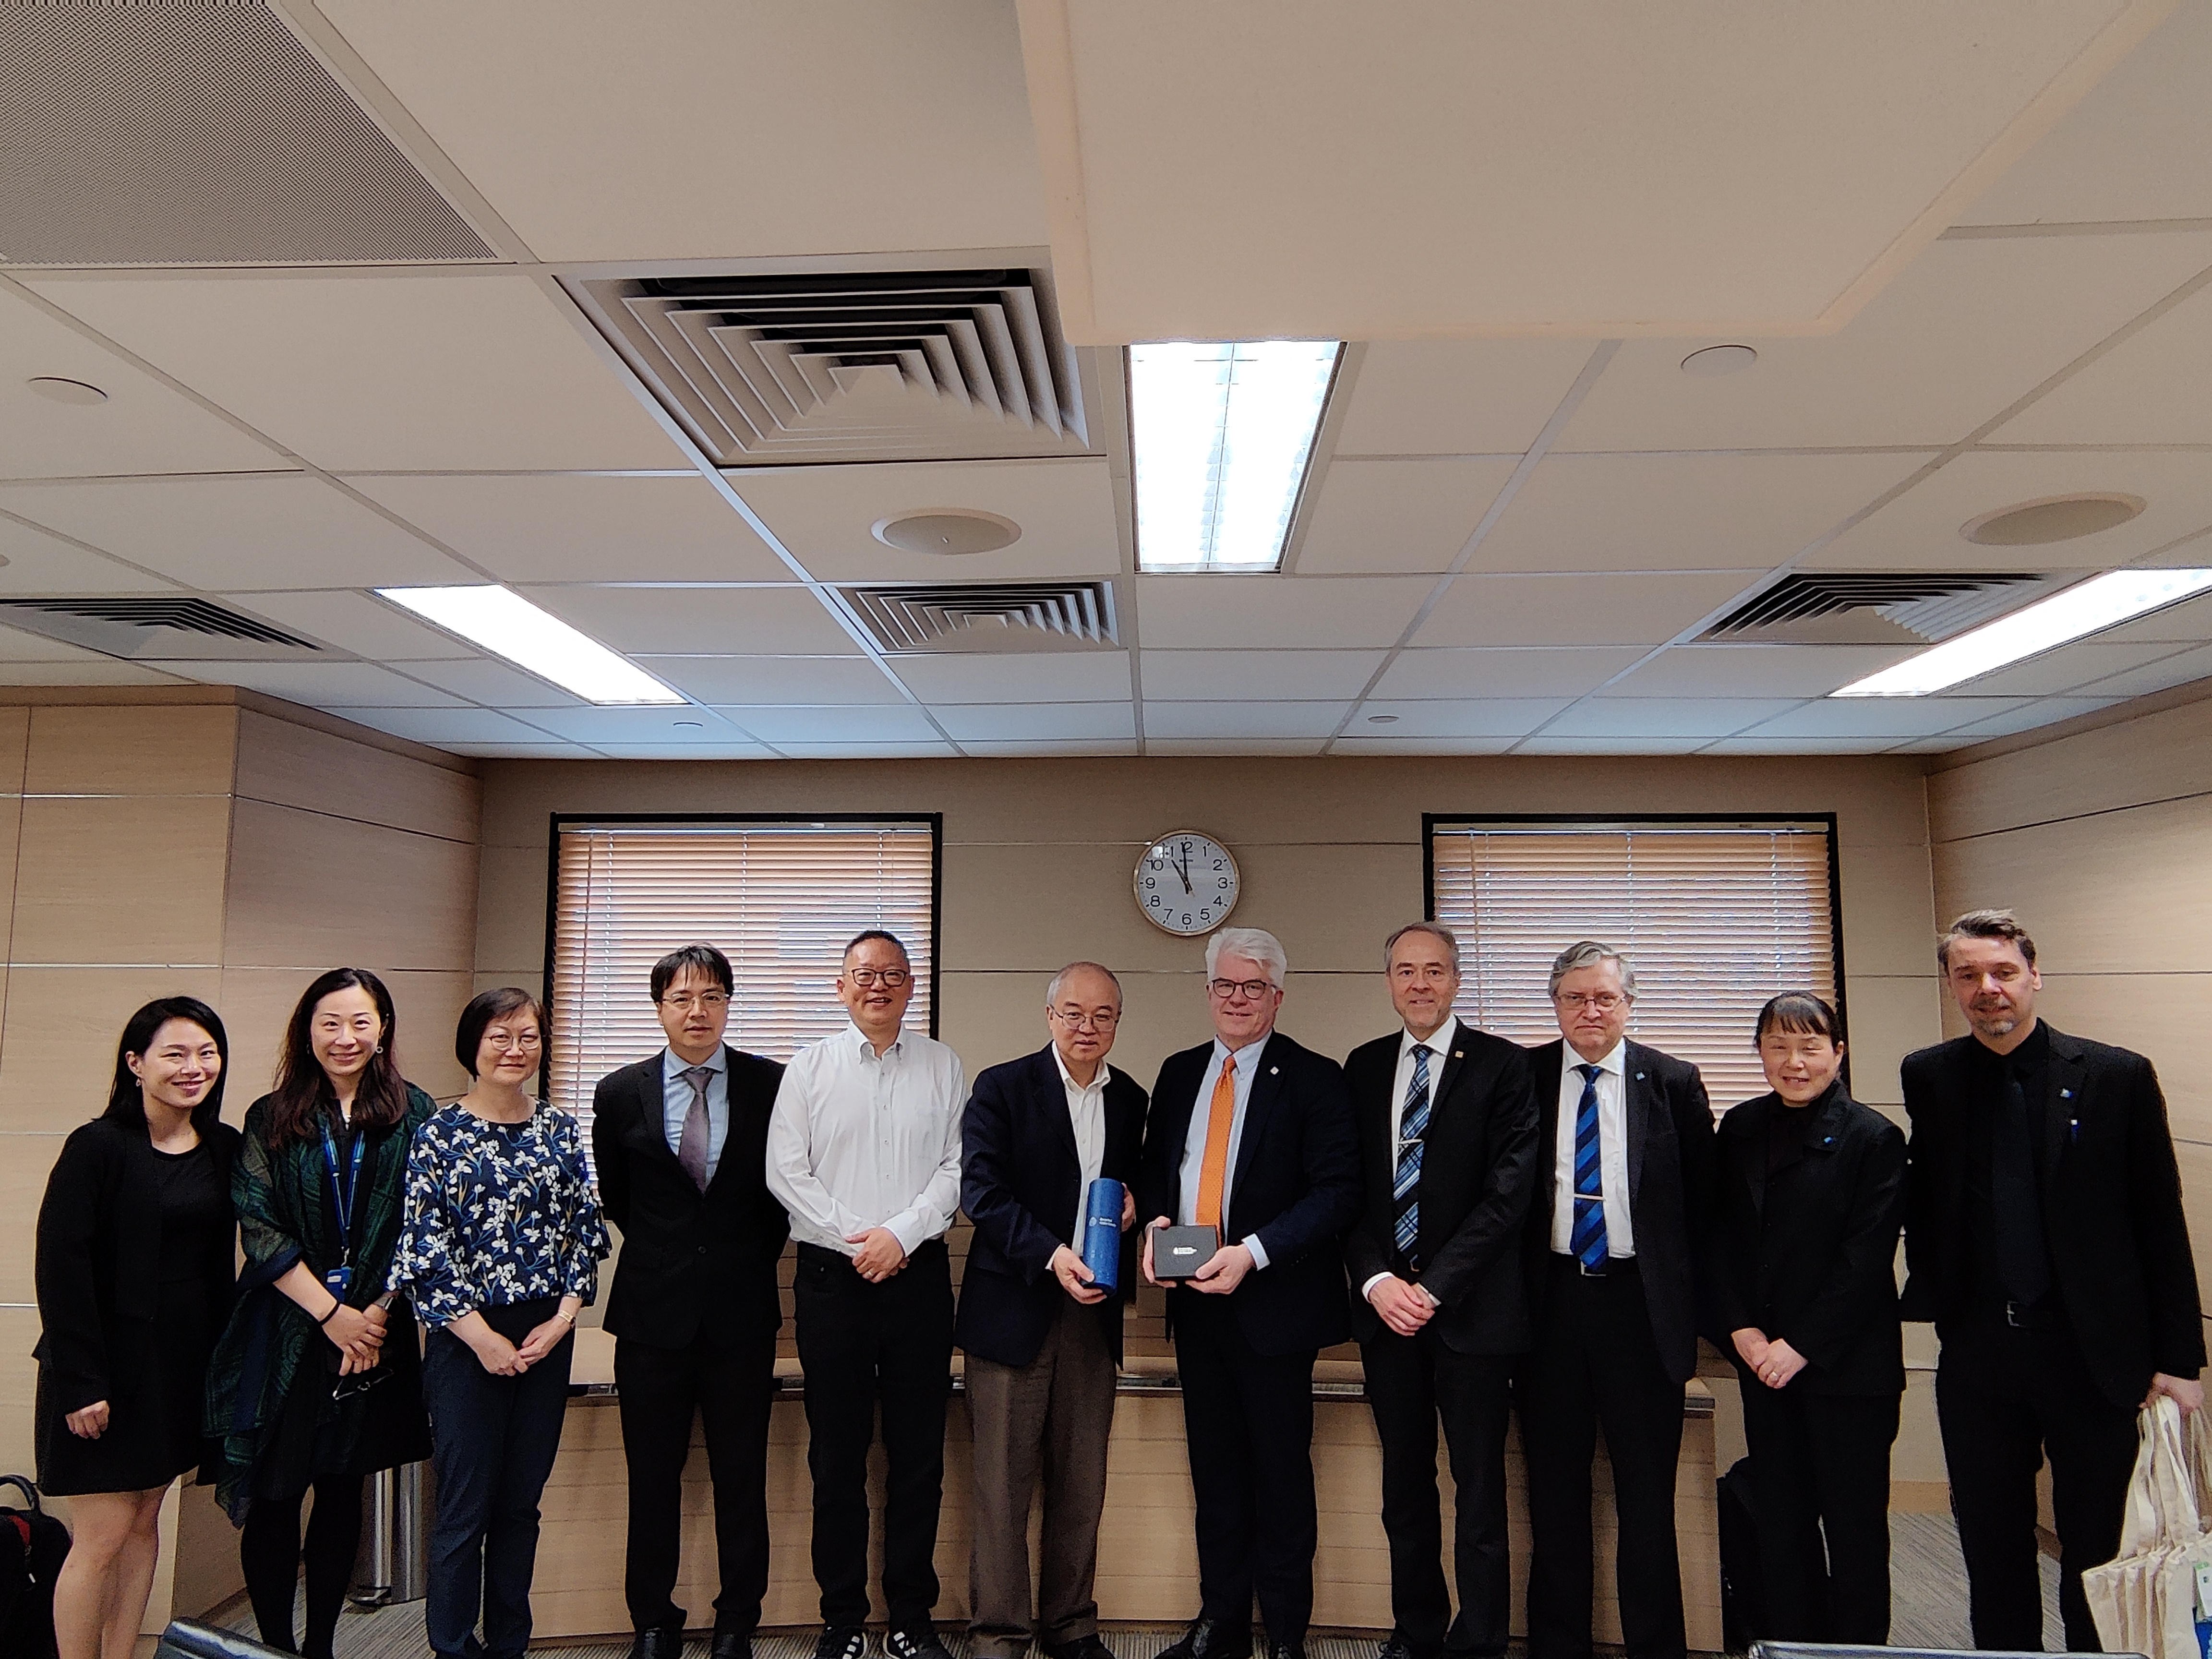 A group photo of the KTH Royal Institute of Technology delegation and HKUST team. 